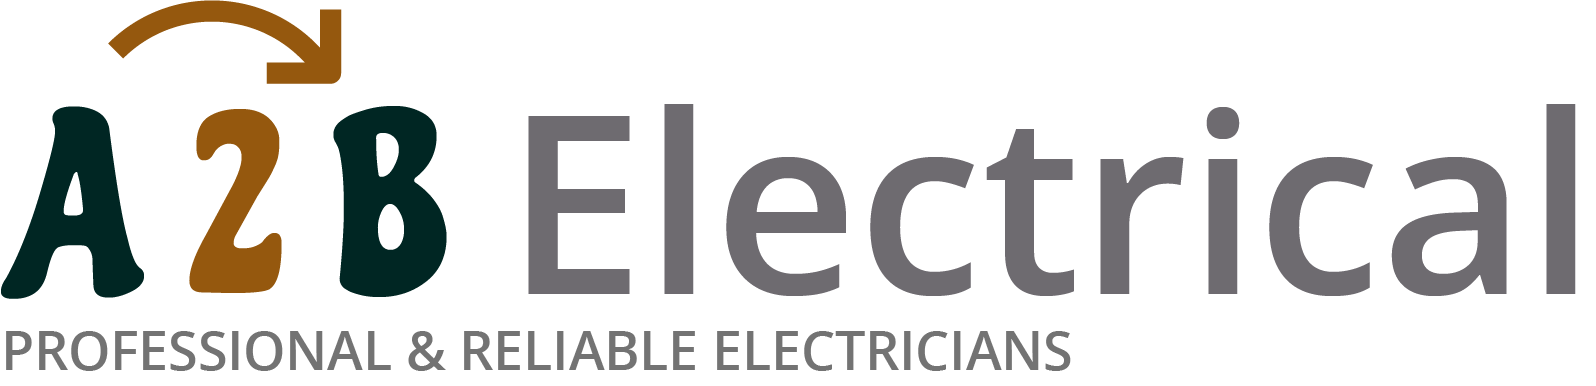 If you have electrical wiring problems in Wivenhoe, we can provide an electrician to have a look for you. 